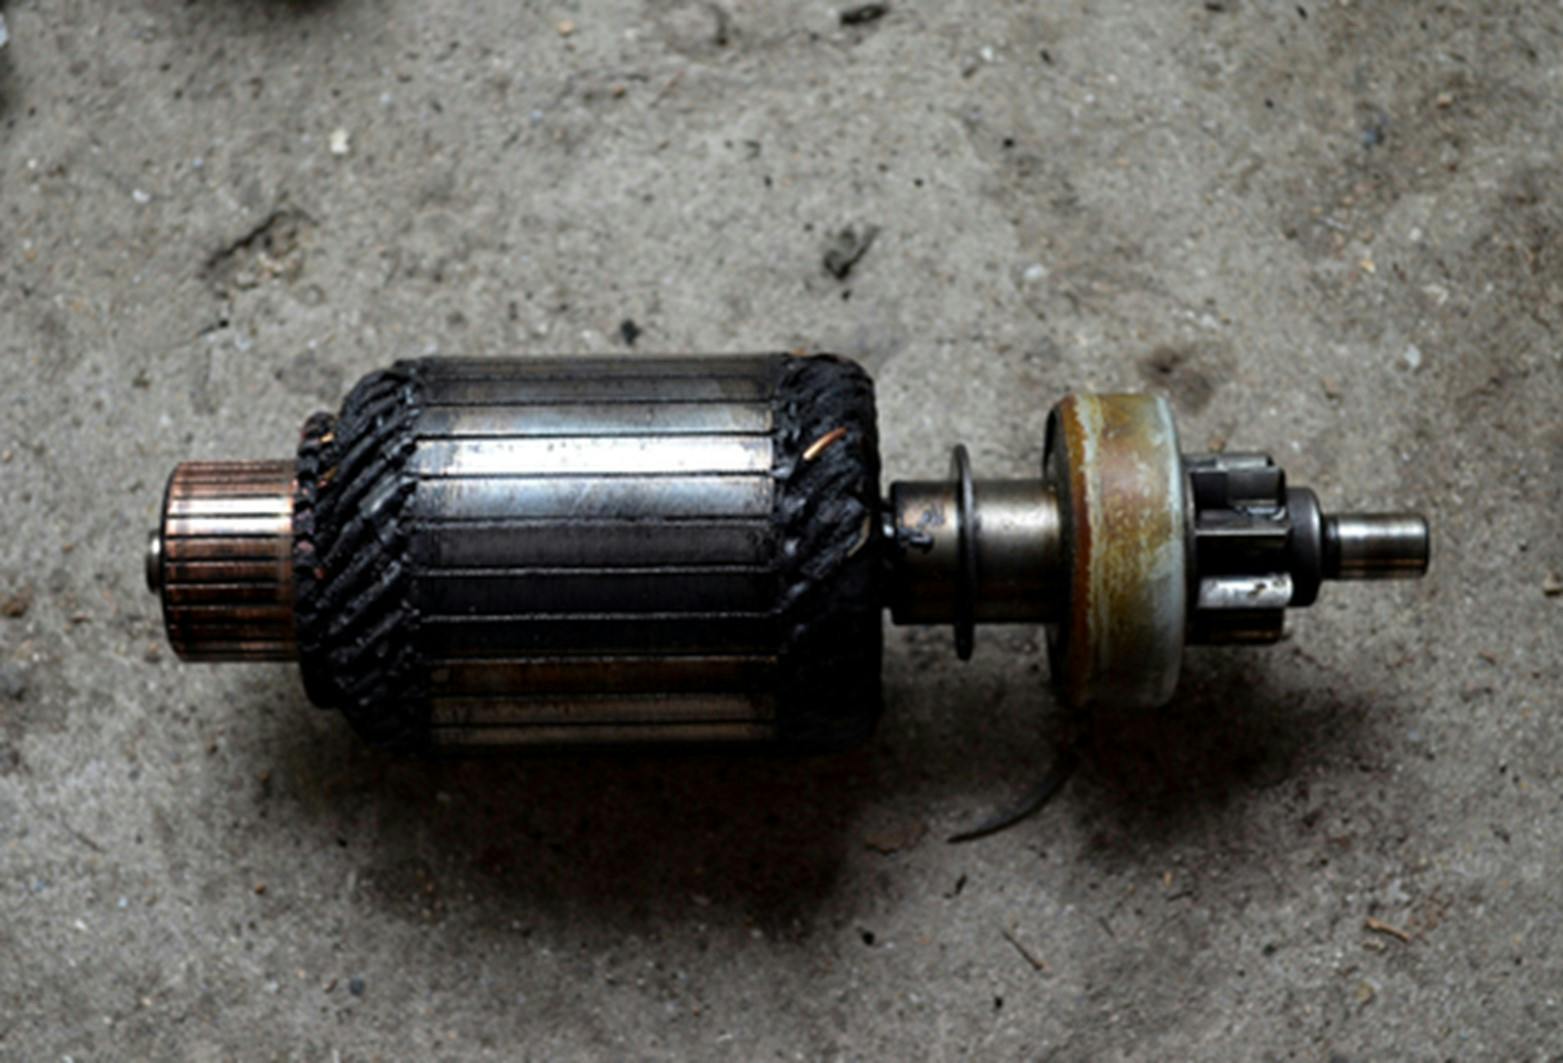 The armature found inside a starter motor laying on the ground